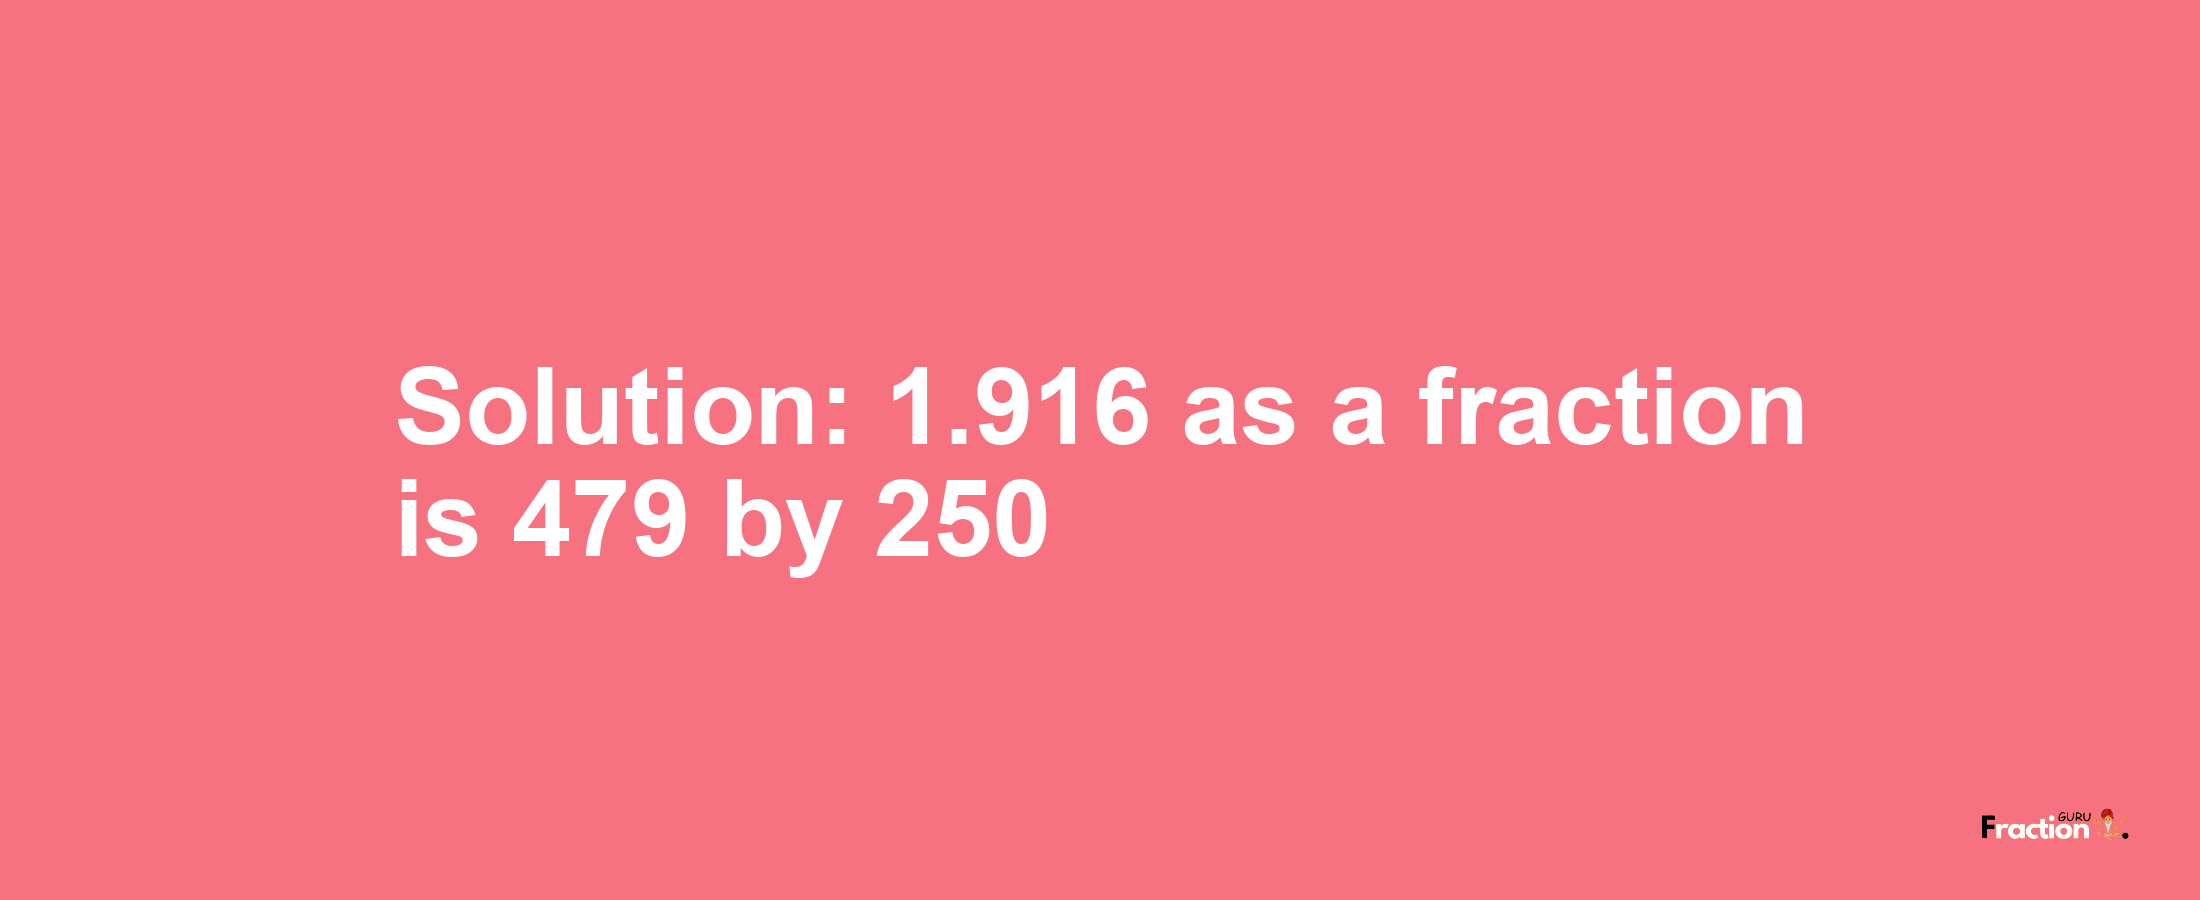 Solution:1.916 as a fraction is 479/250